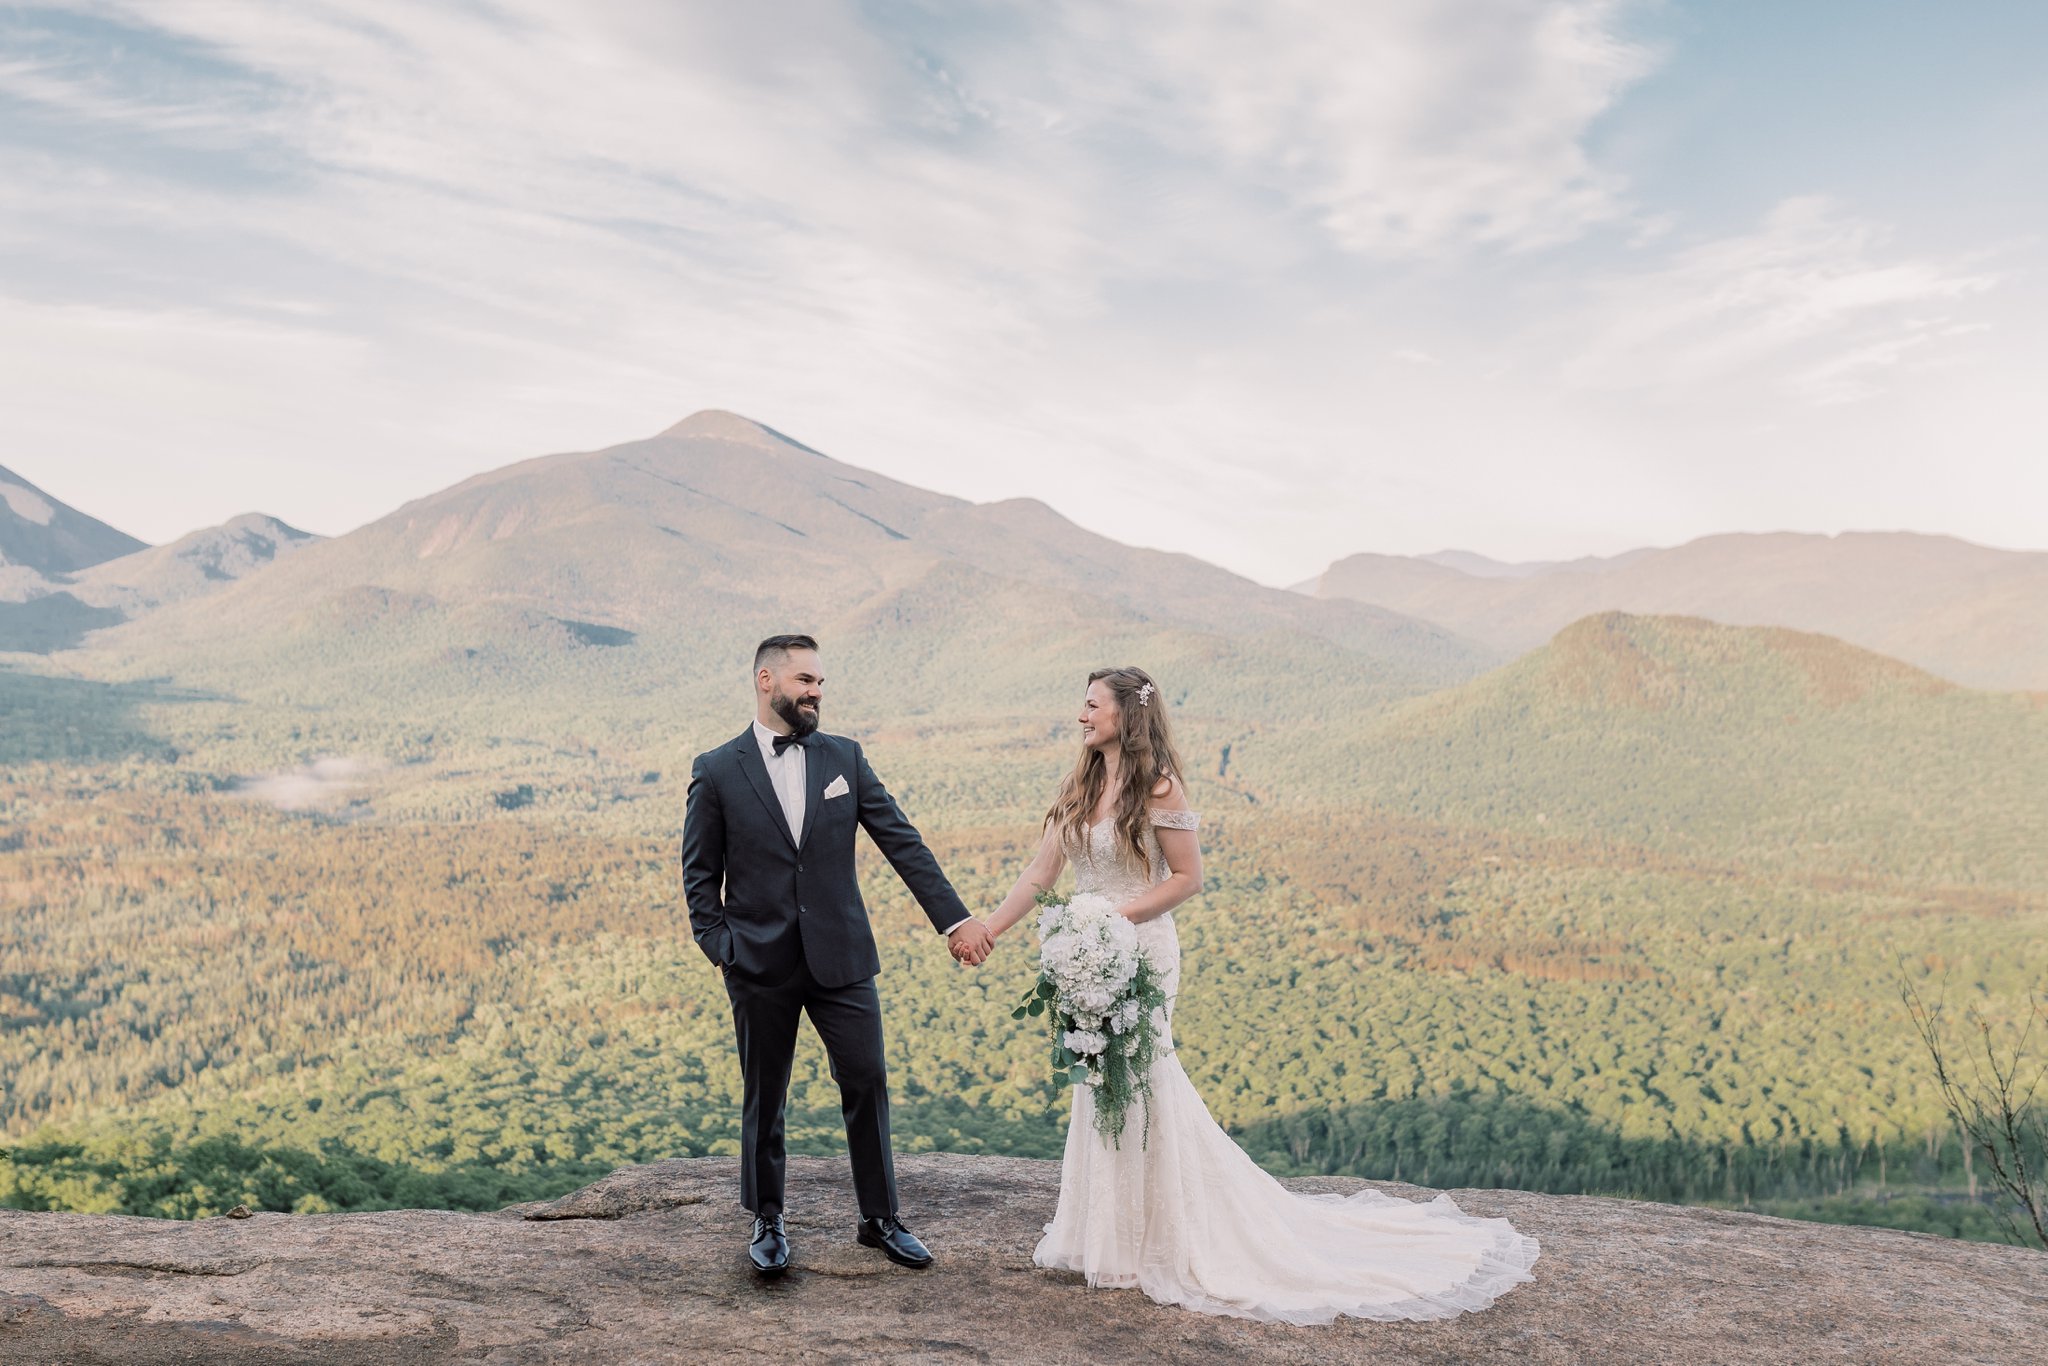 Bride and groom holding hands on the summit of a mountain with Adirondack mountains in the background.